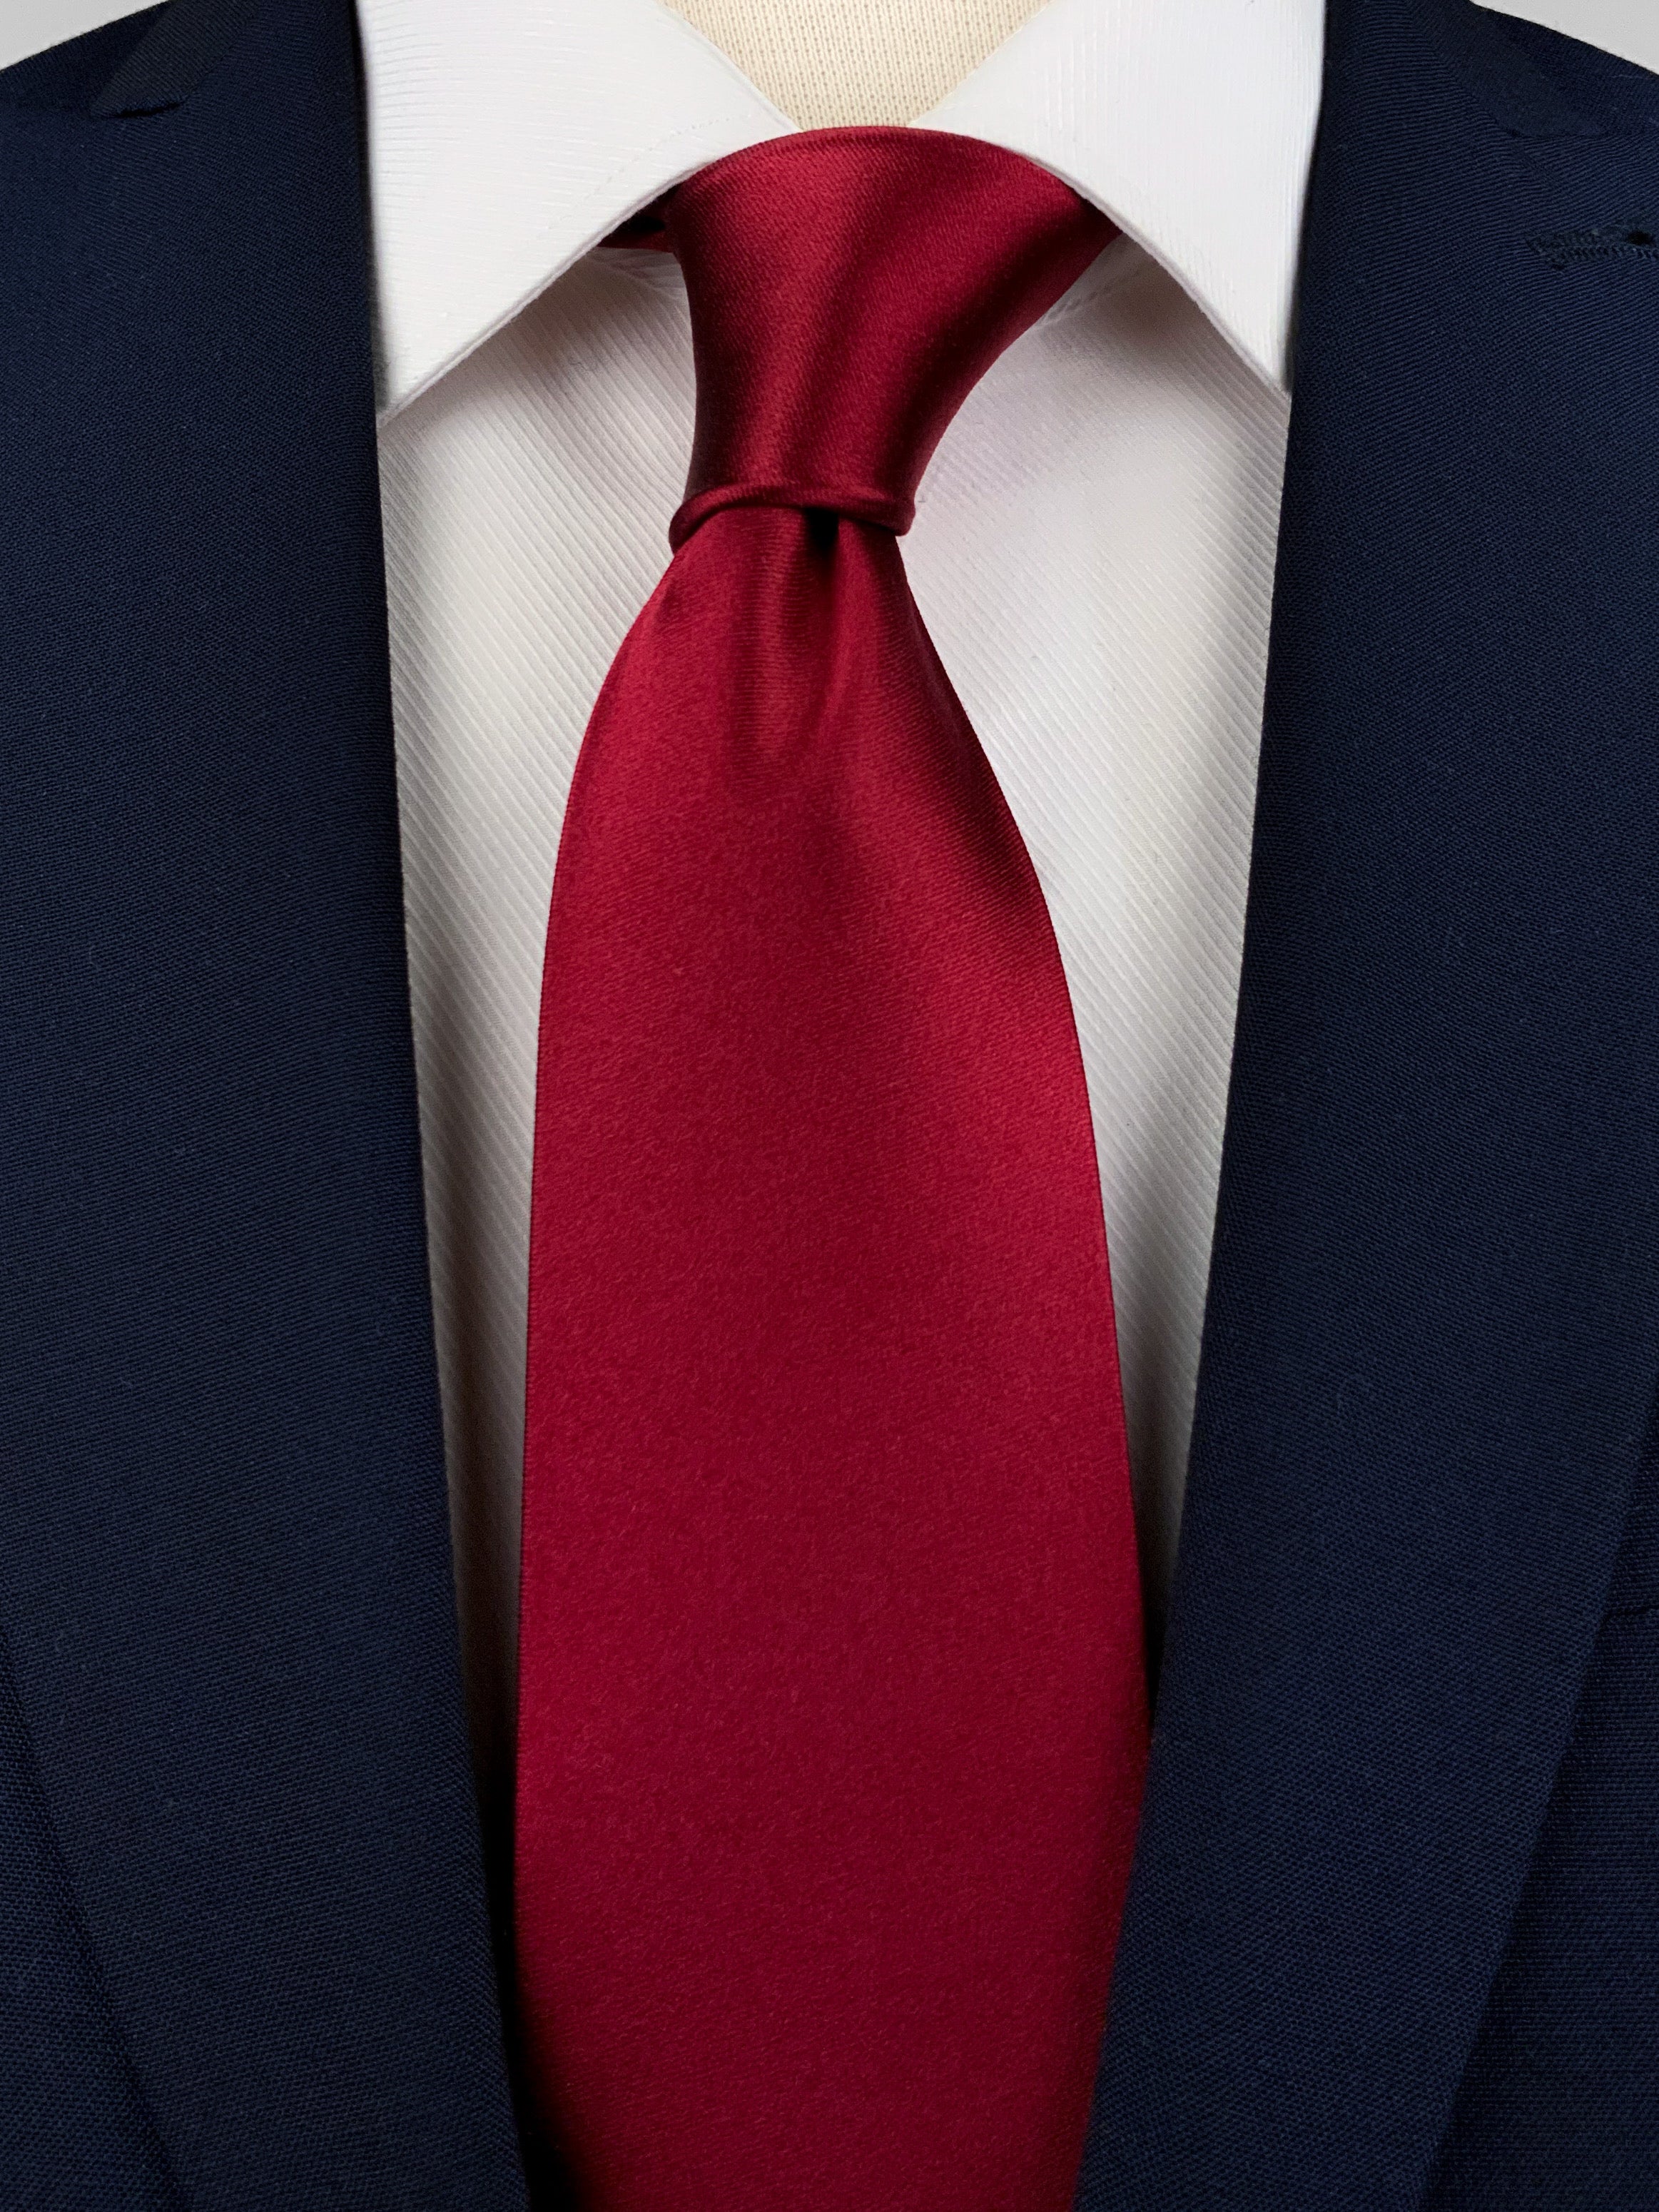 Dark red mulberry silk satin tie worn with a white formal shirt and navy blue suit